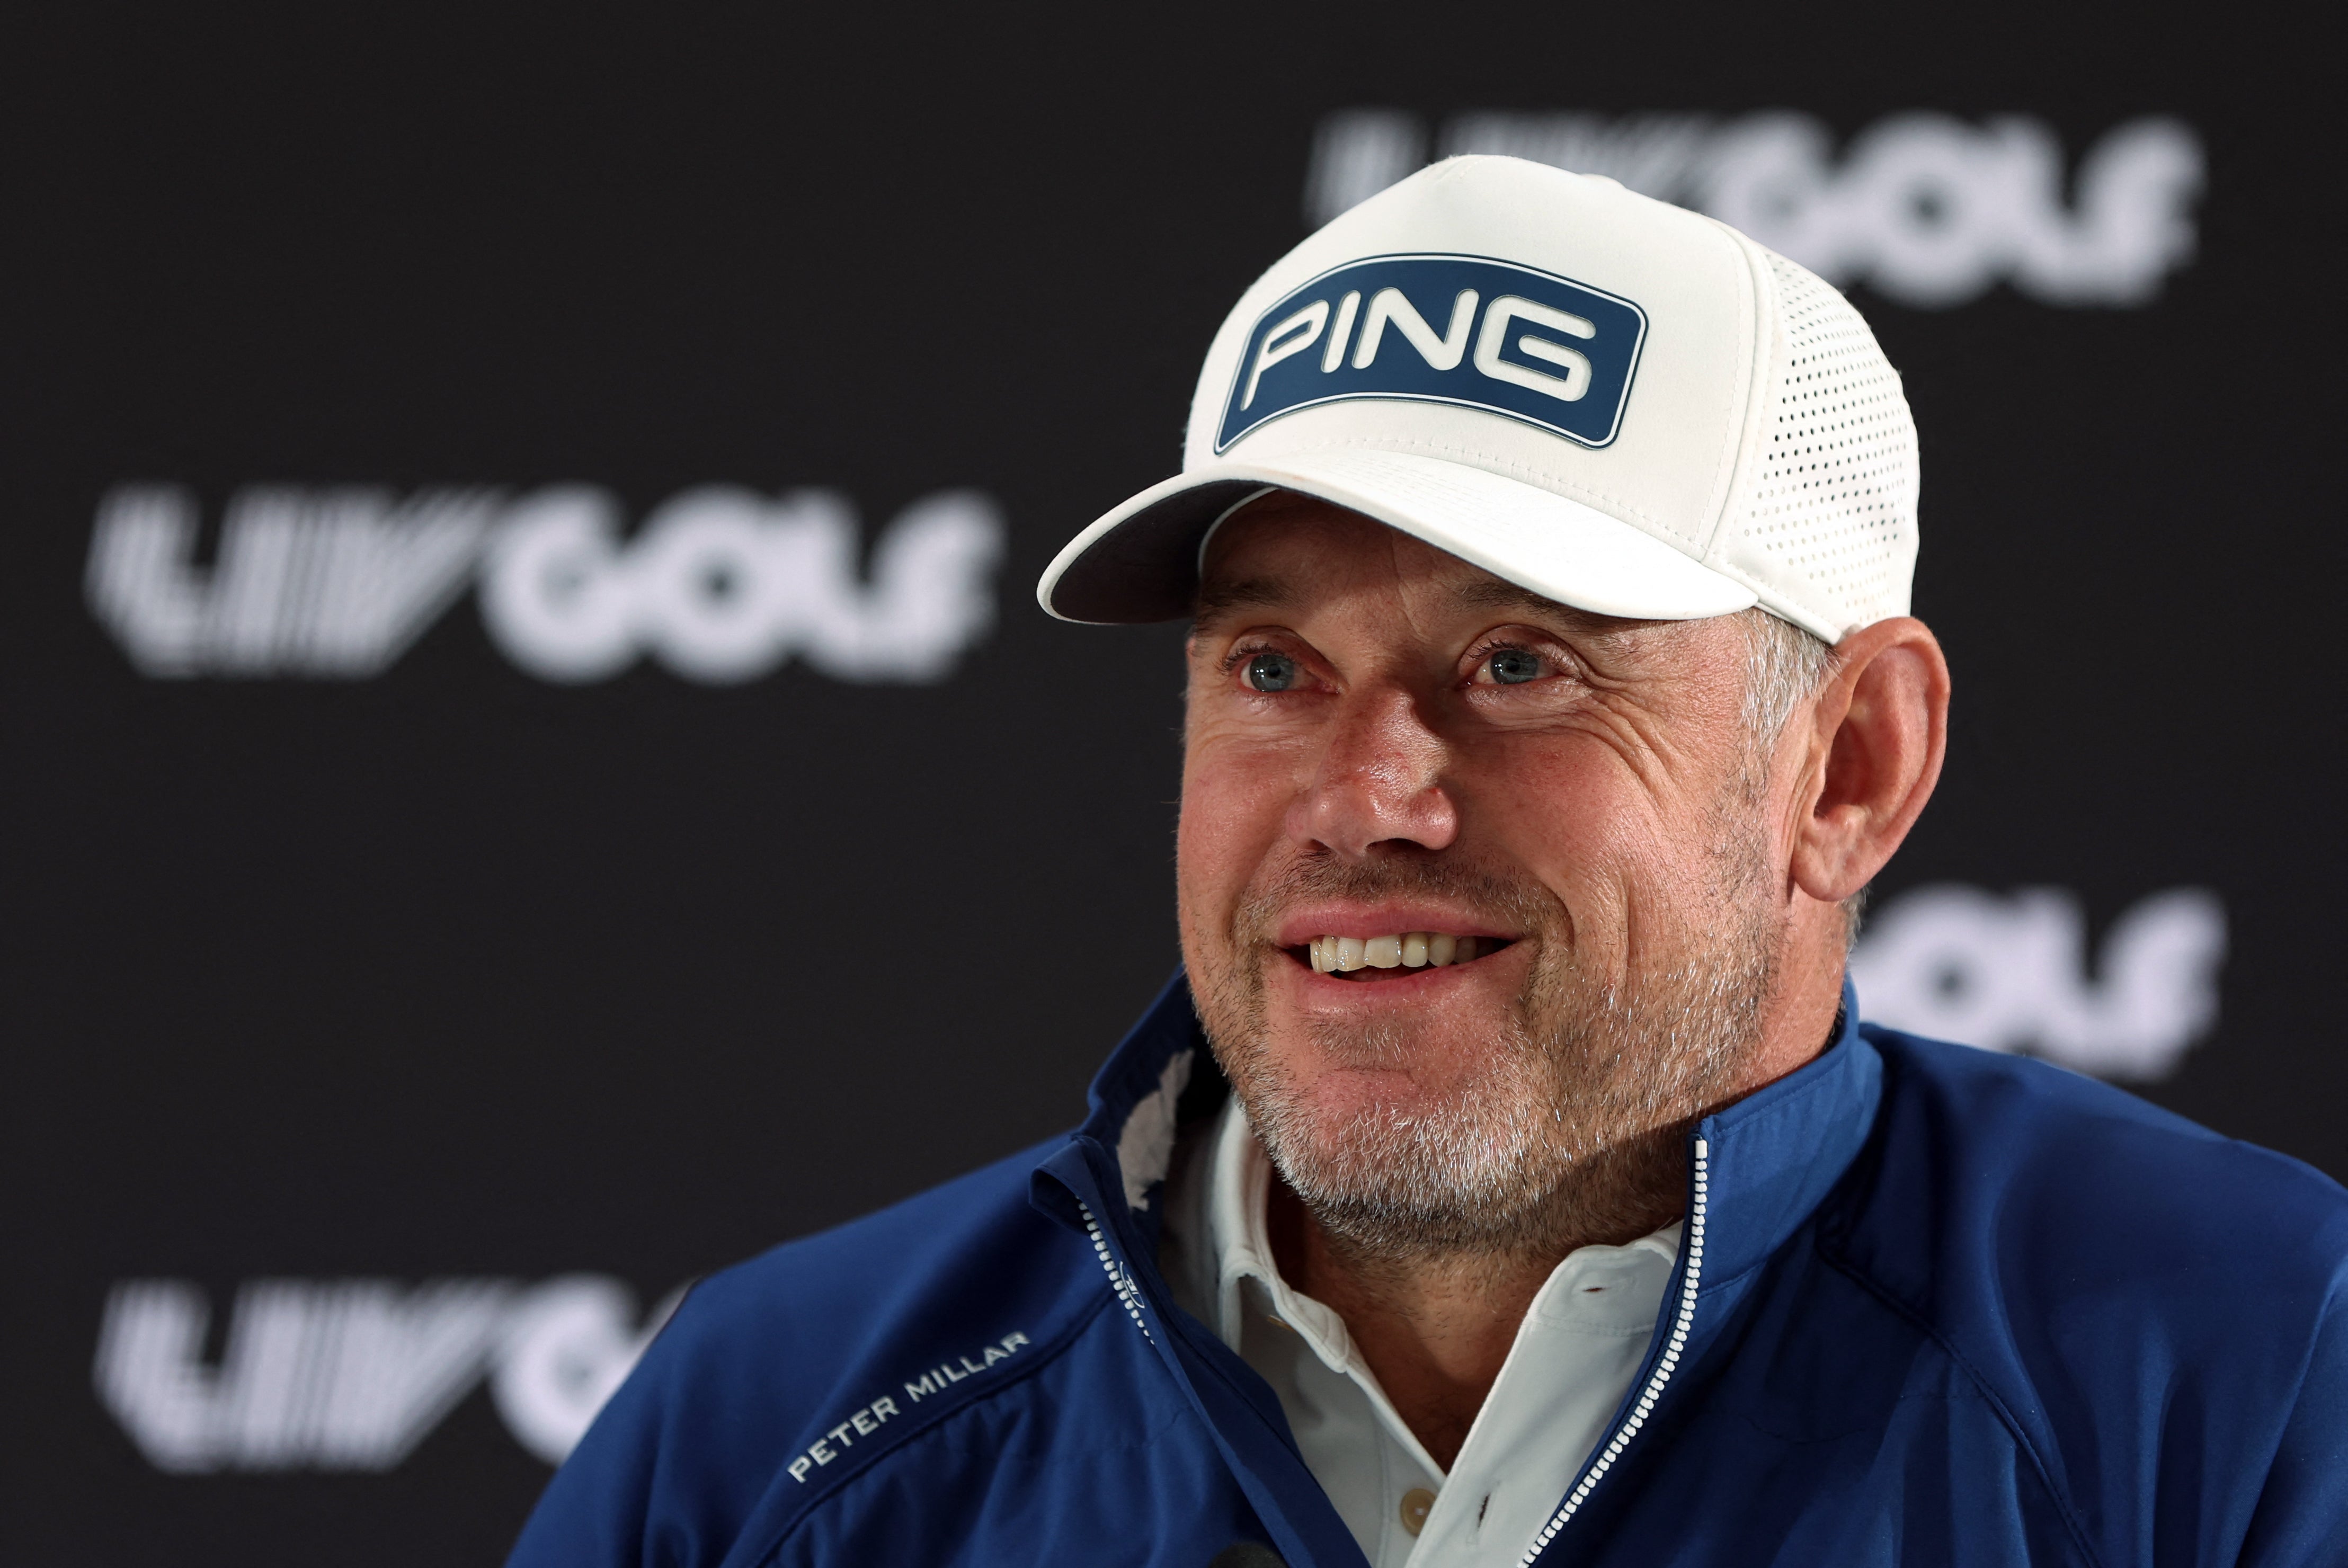 Lee Westwood: 'I'd be stupid not to take LIV Golf money' | The Independent